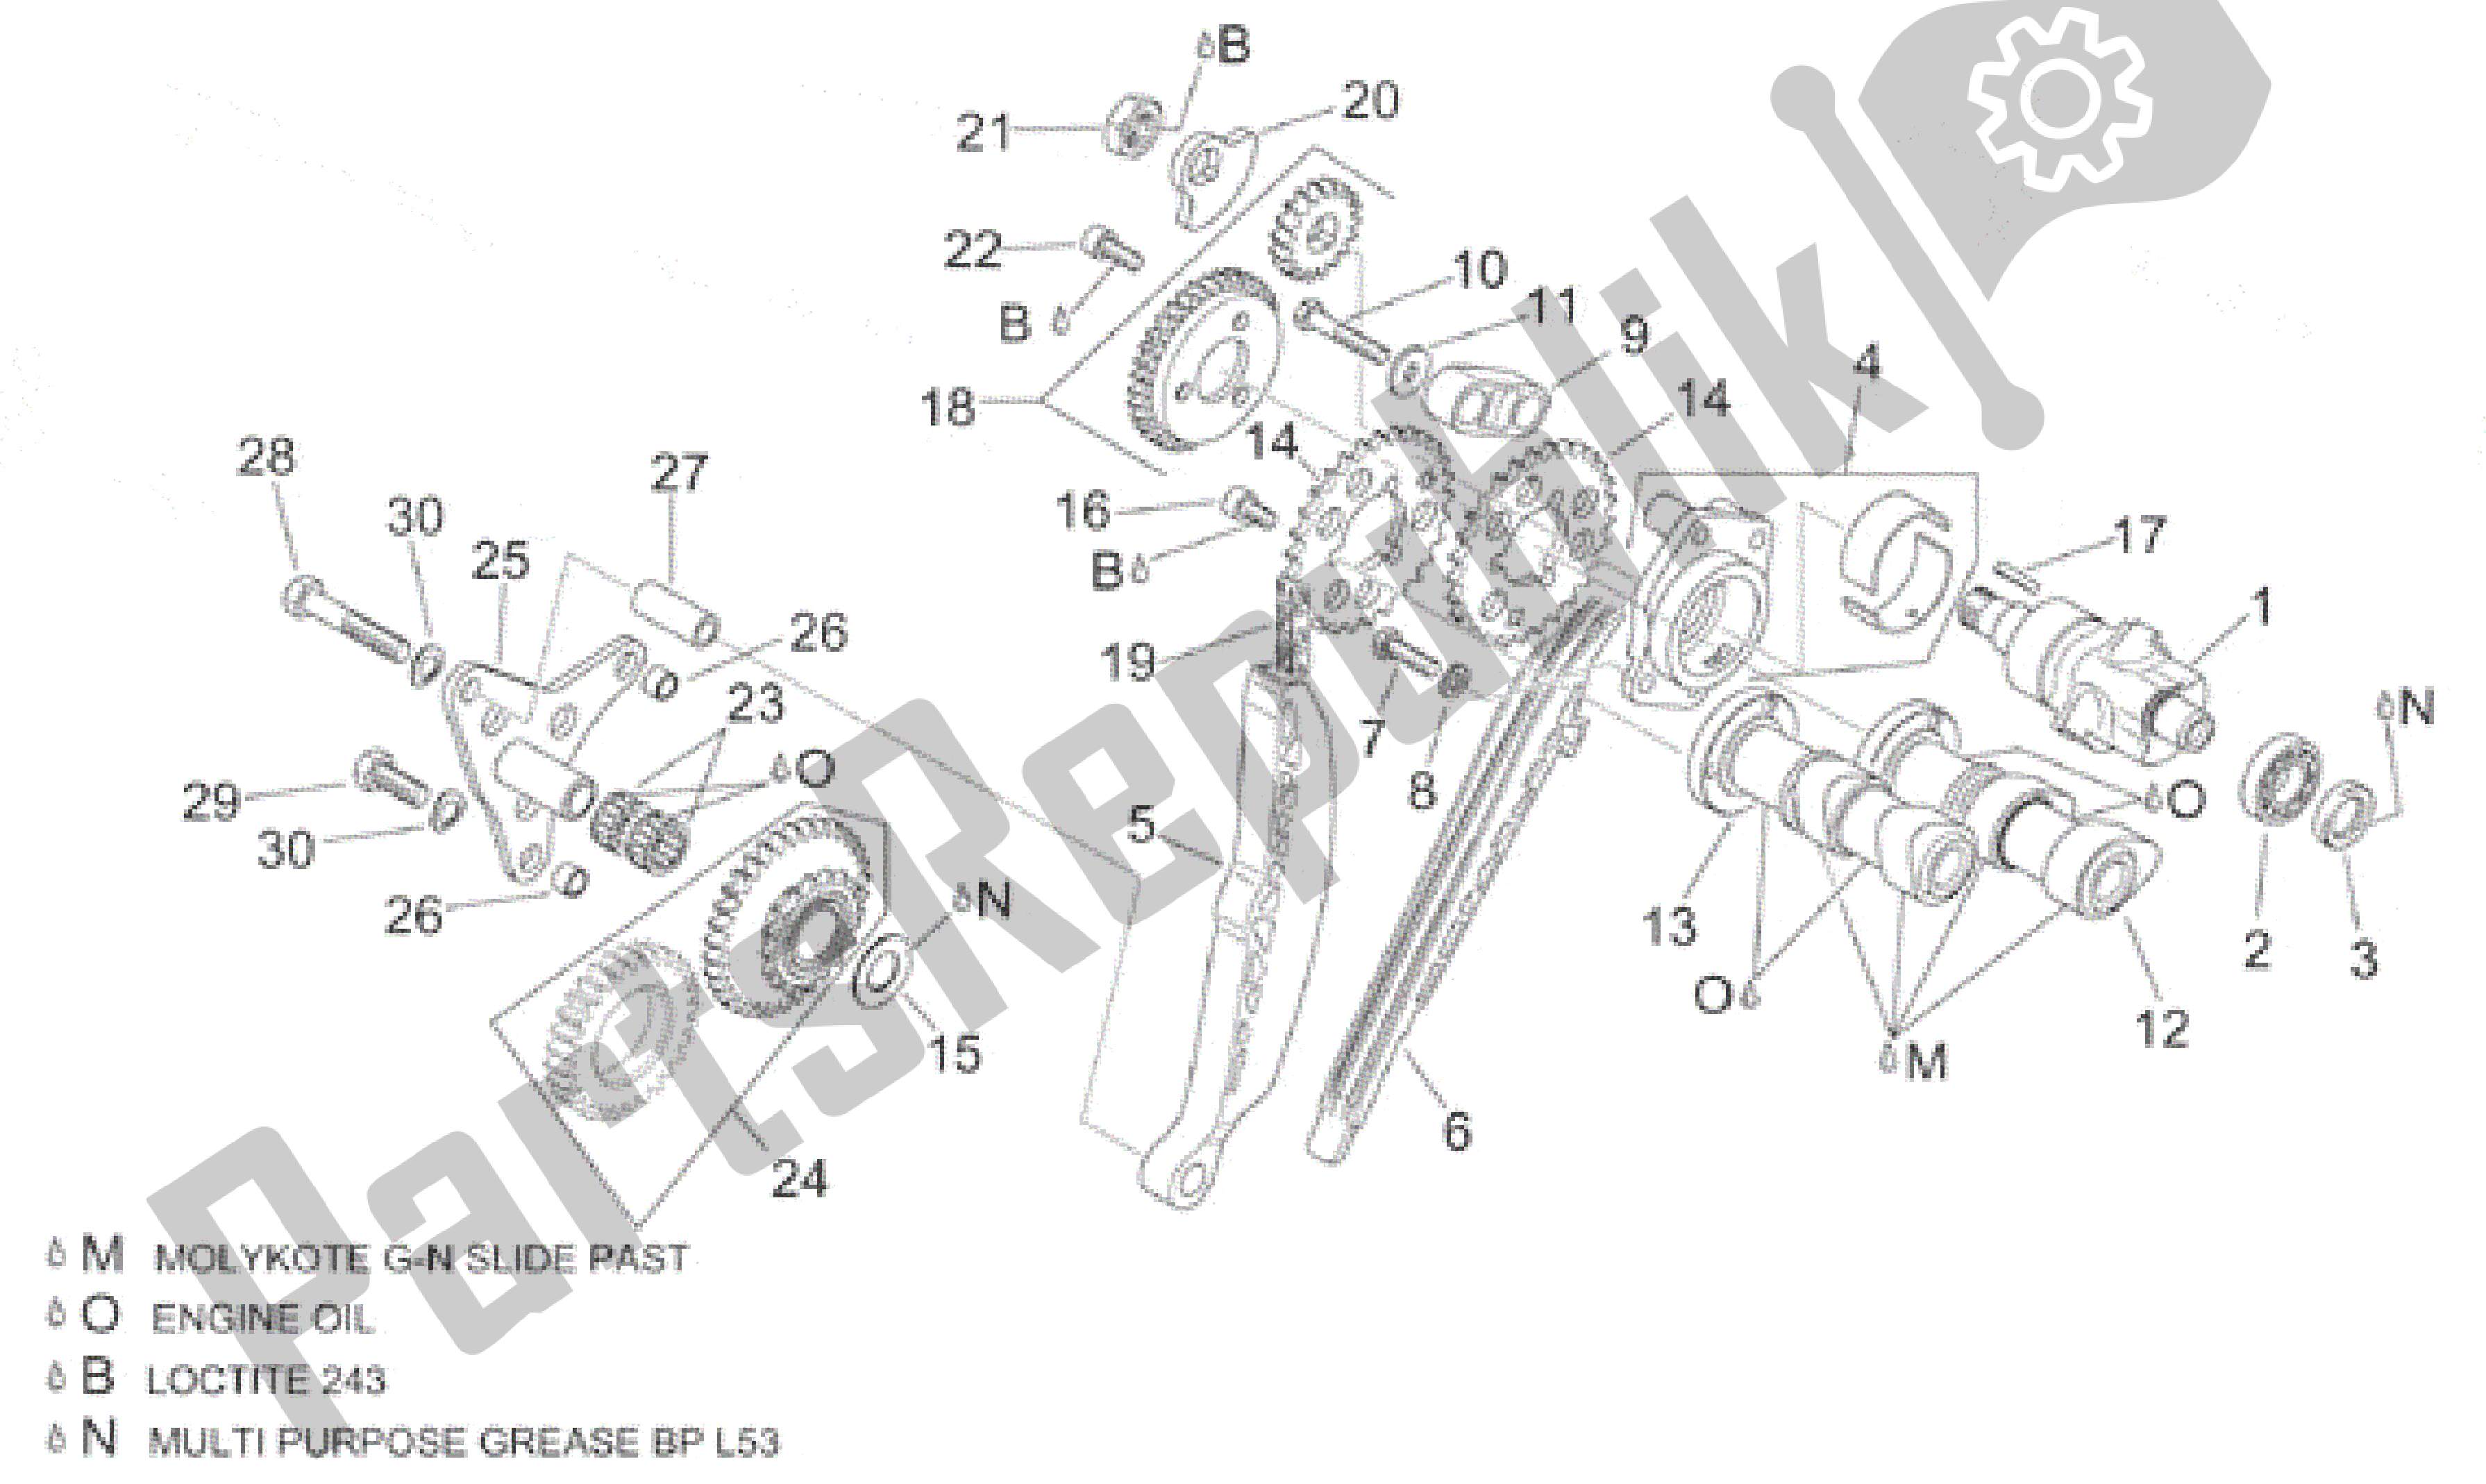 All parts for the Rear Cylinder Timing System of the Aprilia SL Falco 1000 2000 - 2002